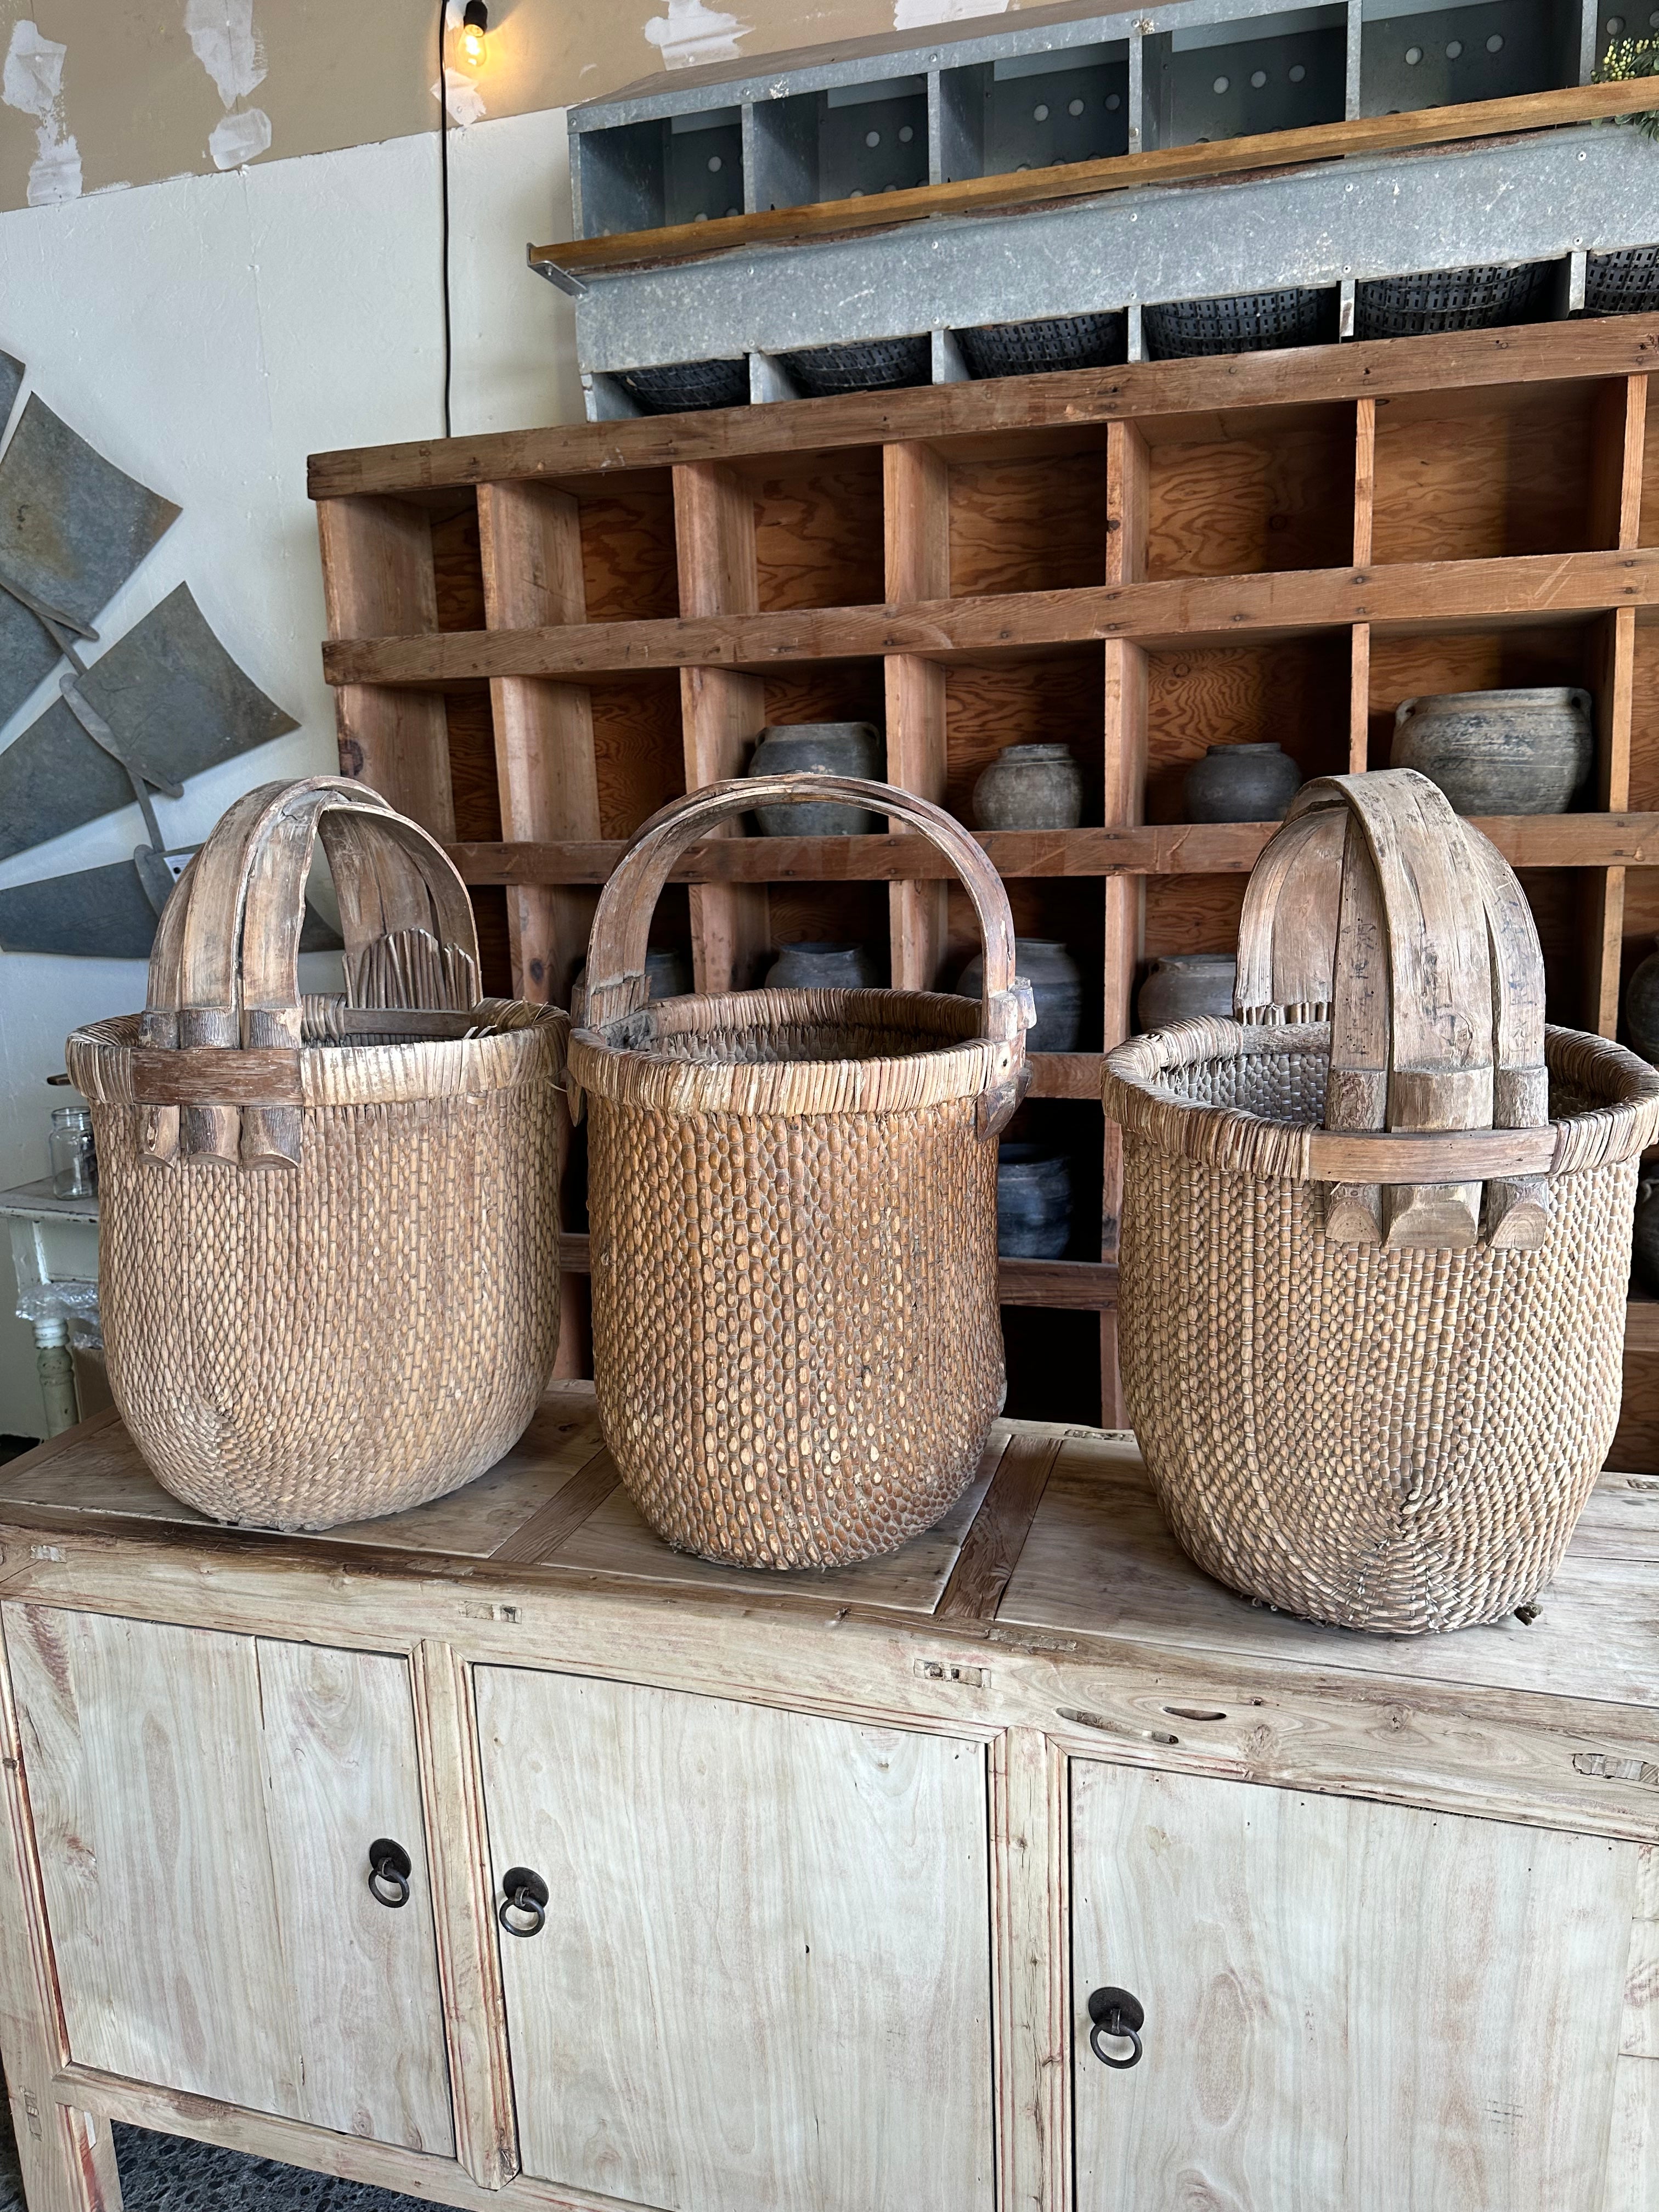 Baskets - Willow Vegetable